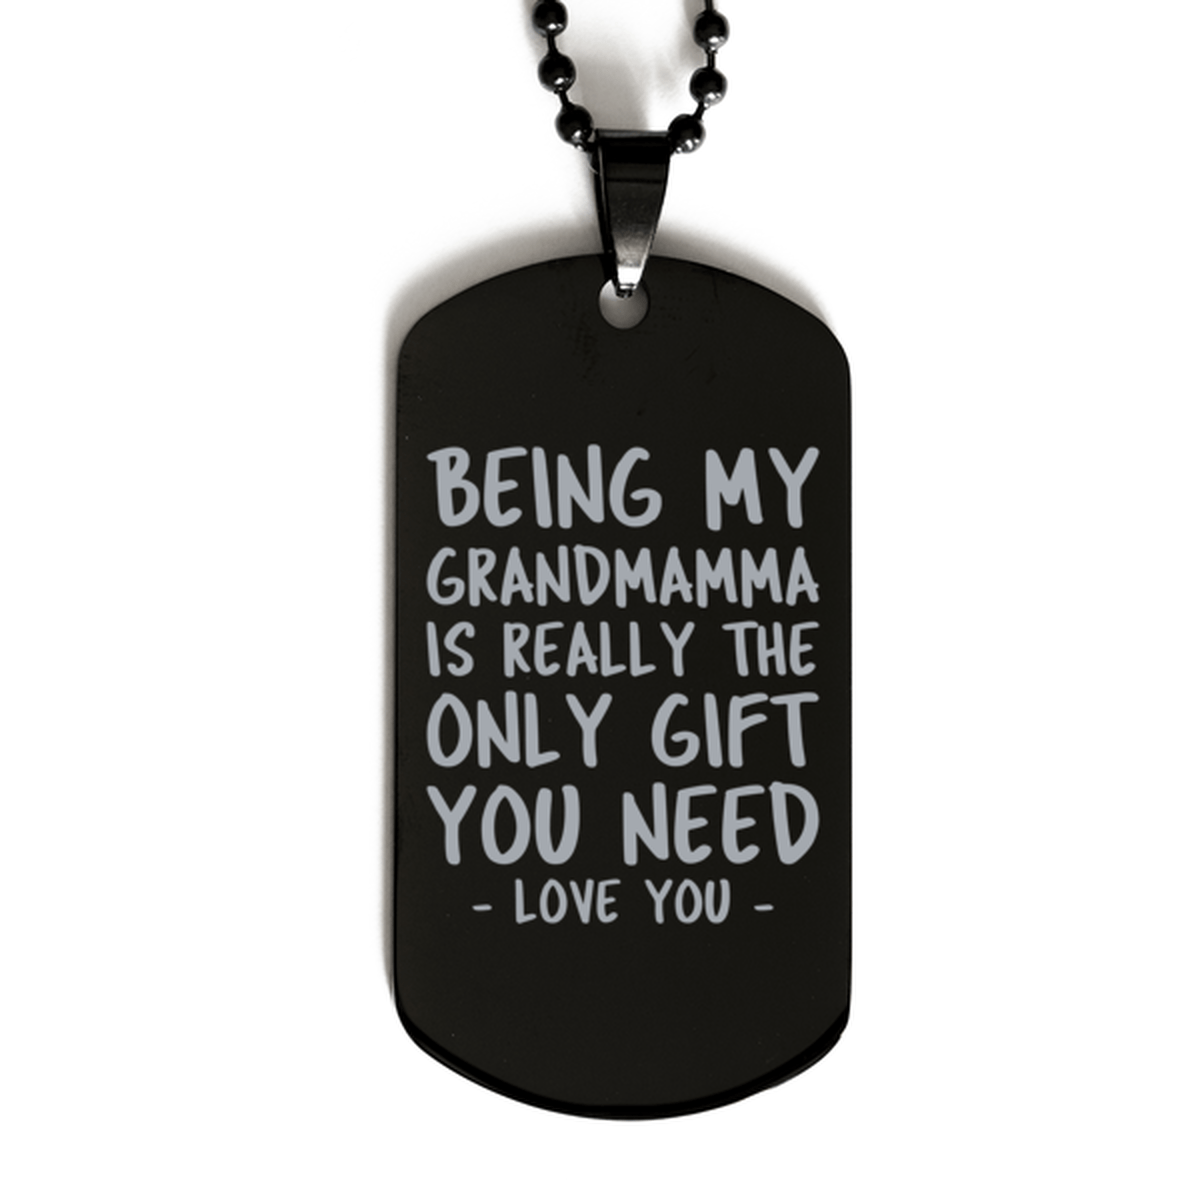 Funny Grandmamma Black Dog Tag Necklace, Being My Grandmamma Is Really the Only Gift You Need, Best Birthday Gifts for Grandmamma